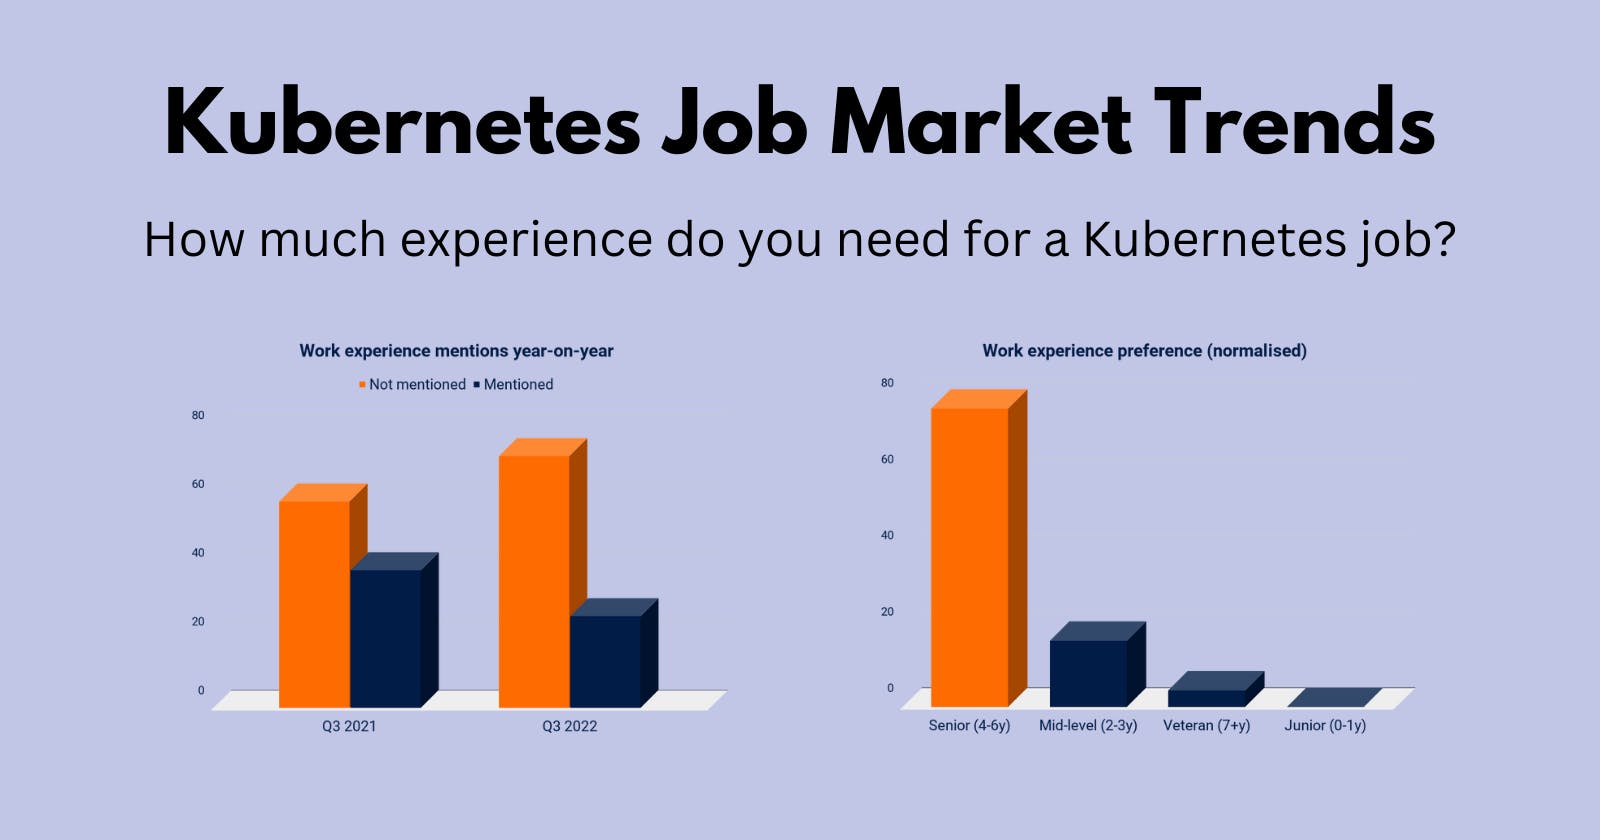 How much experience do you need for a Kubernetes job?